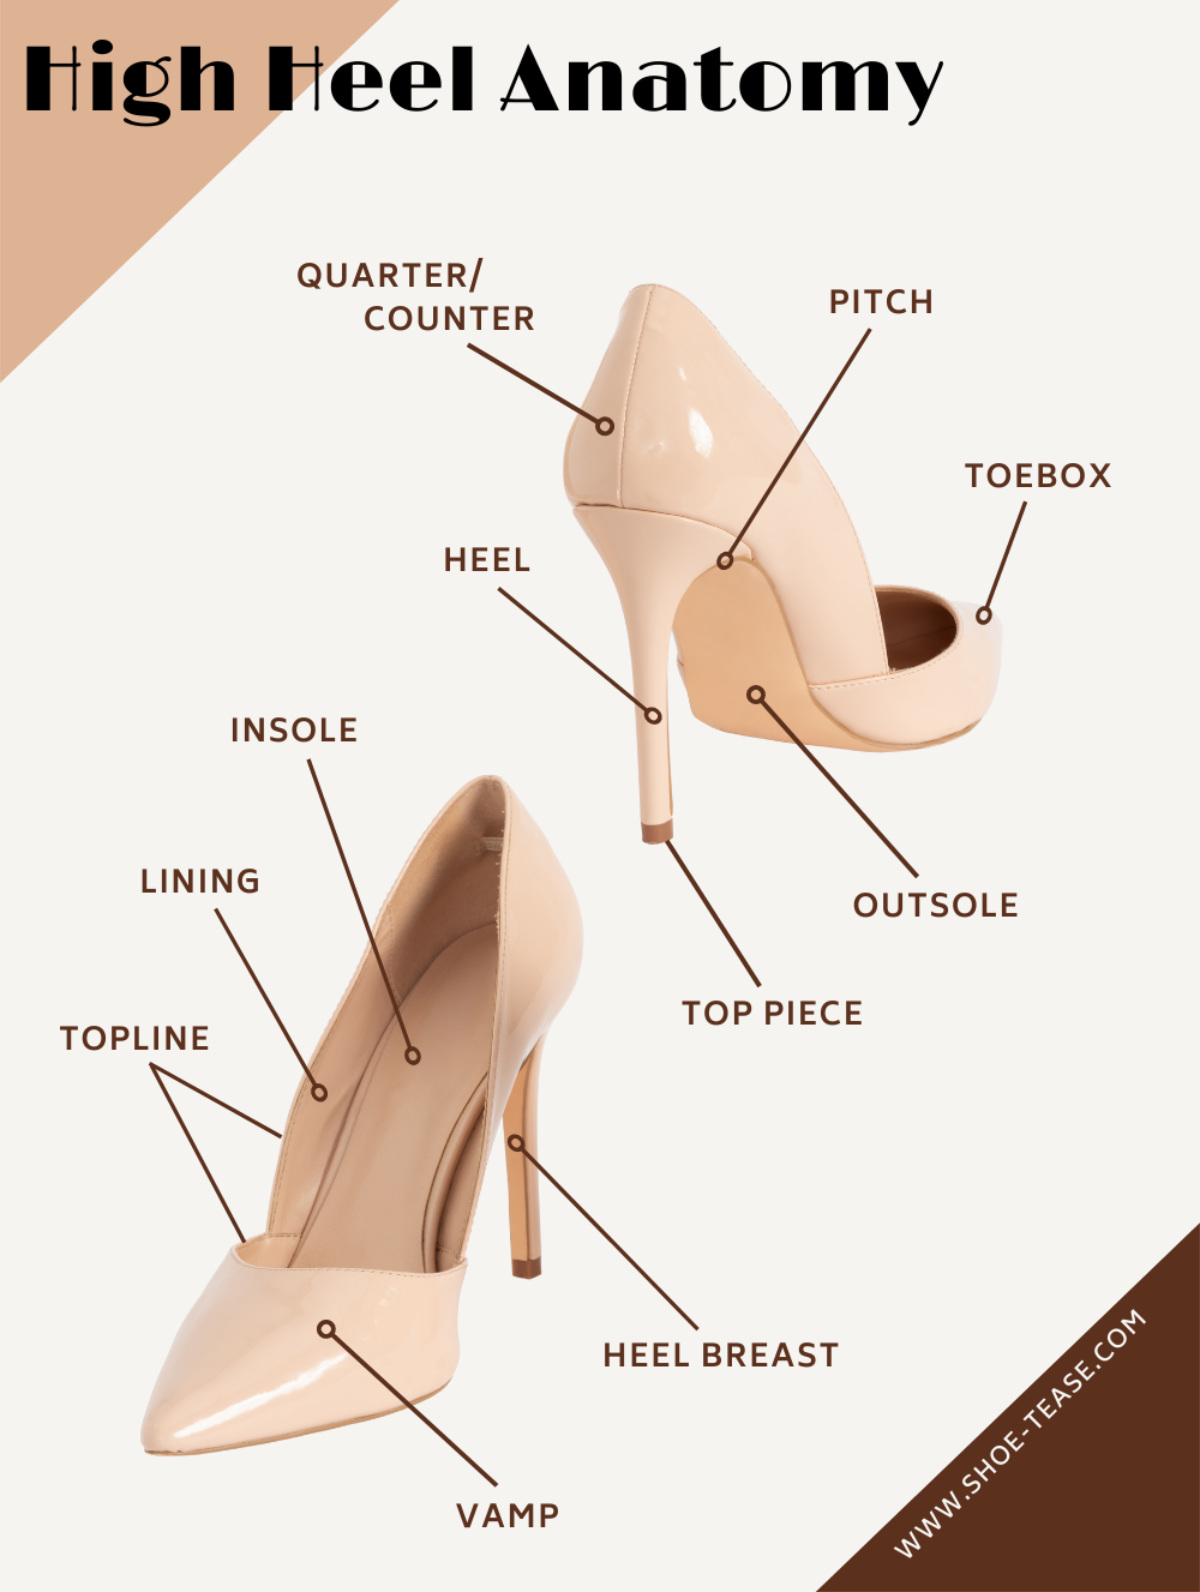 Parts of a High Heel Anatomy by ShoeTease